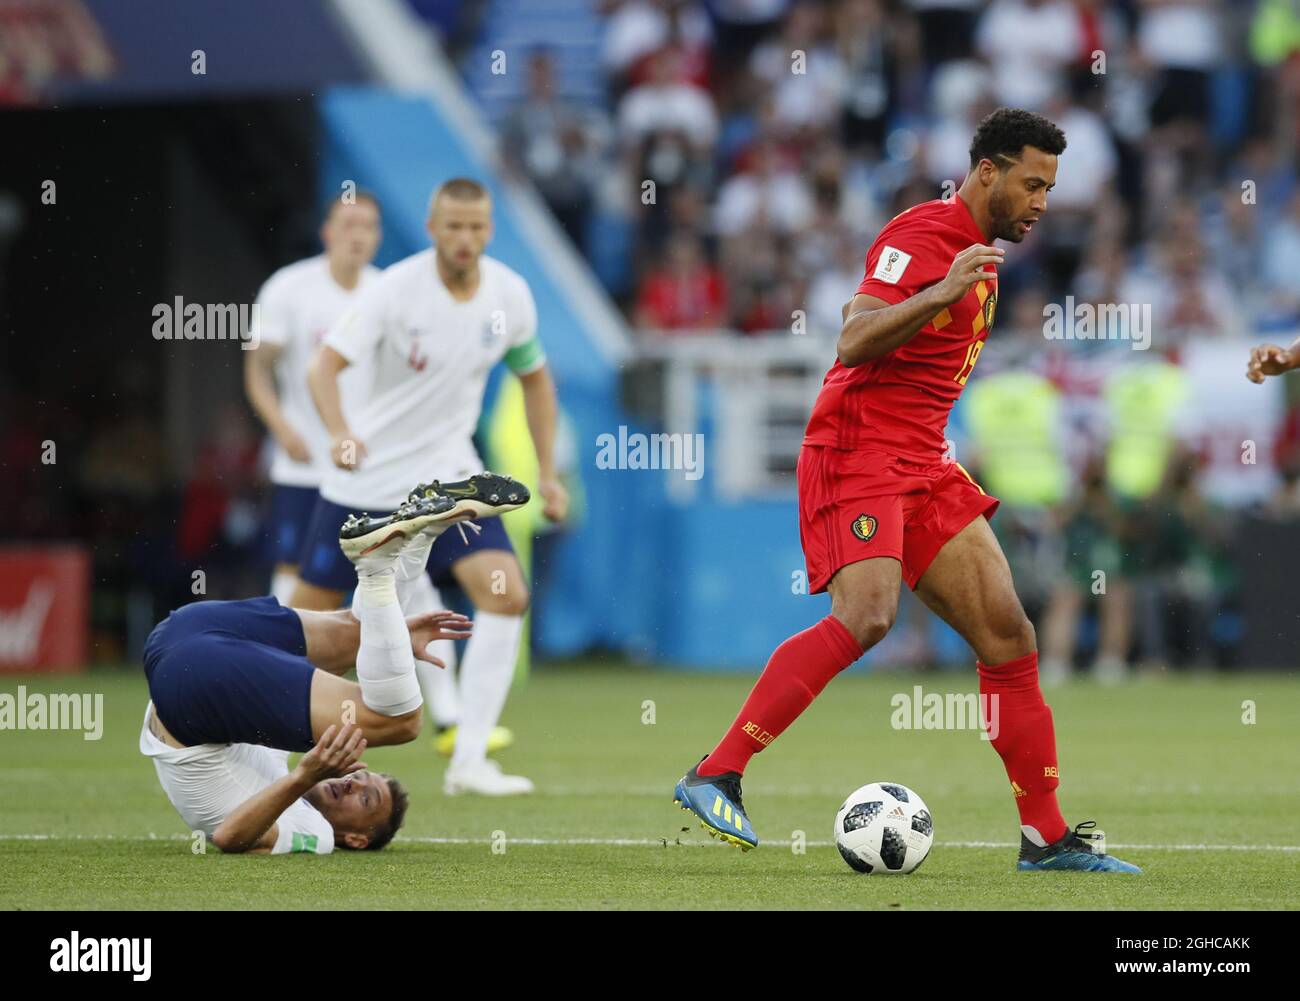 Moussa Dembele of Belgium upturns Jamie Vardy of England during the FIFA World Cup 2018 Group G match at the Kaliningrad Stadium, Kaliningrad. Picture date 28th June 2018. Picture credit should read: David Klein/Sportimage via PA Images Stock Photo